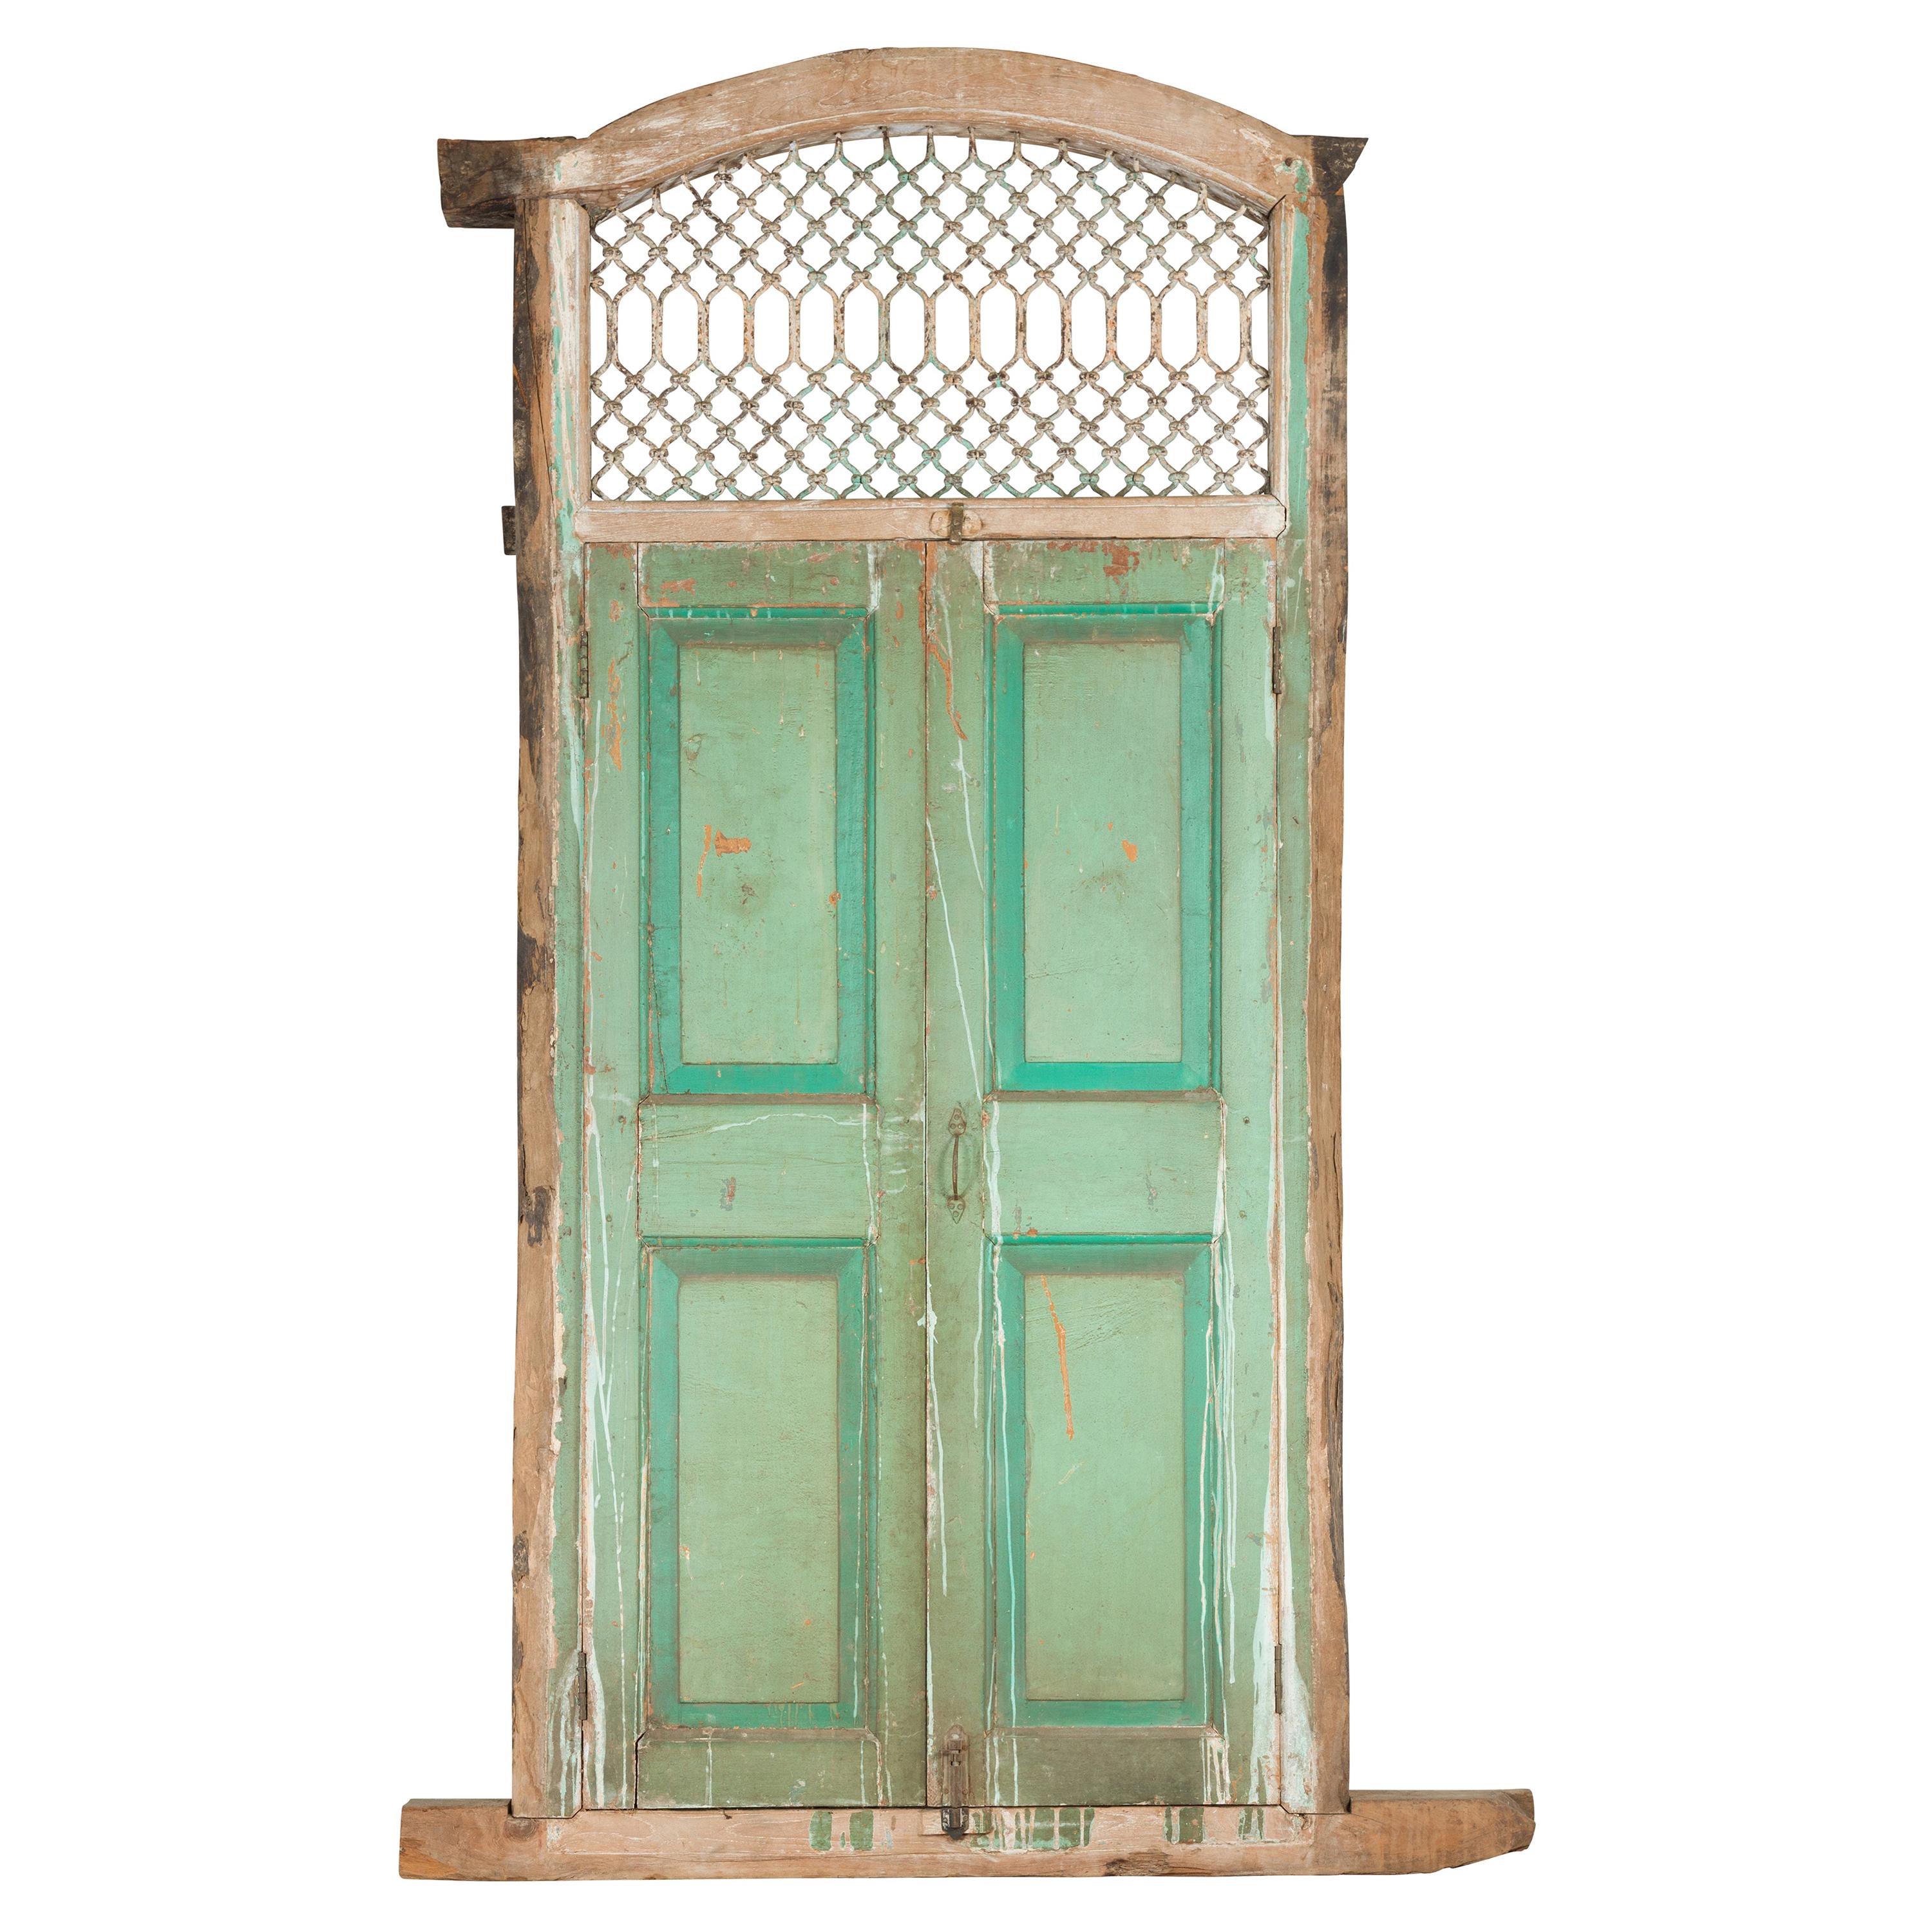 Indian 1900s Wood and Grate Window with Green Paint and Distressed Patina